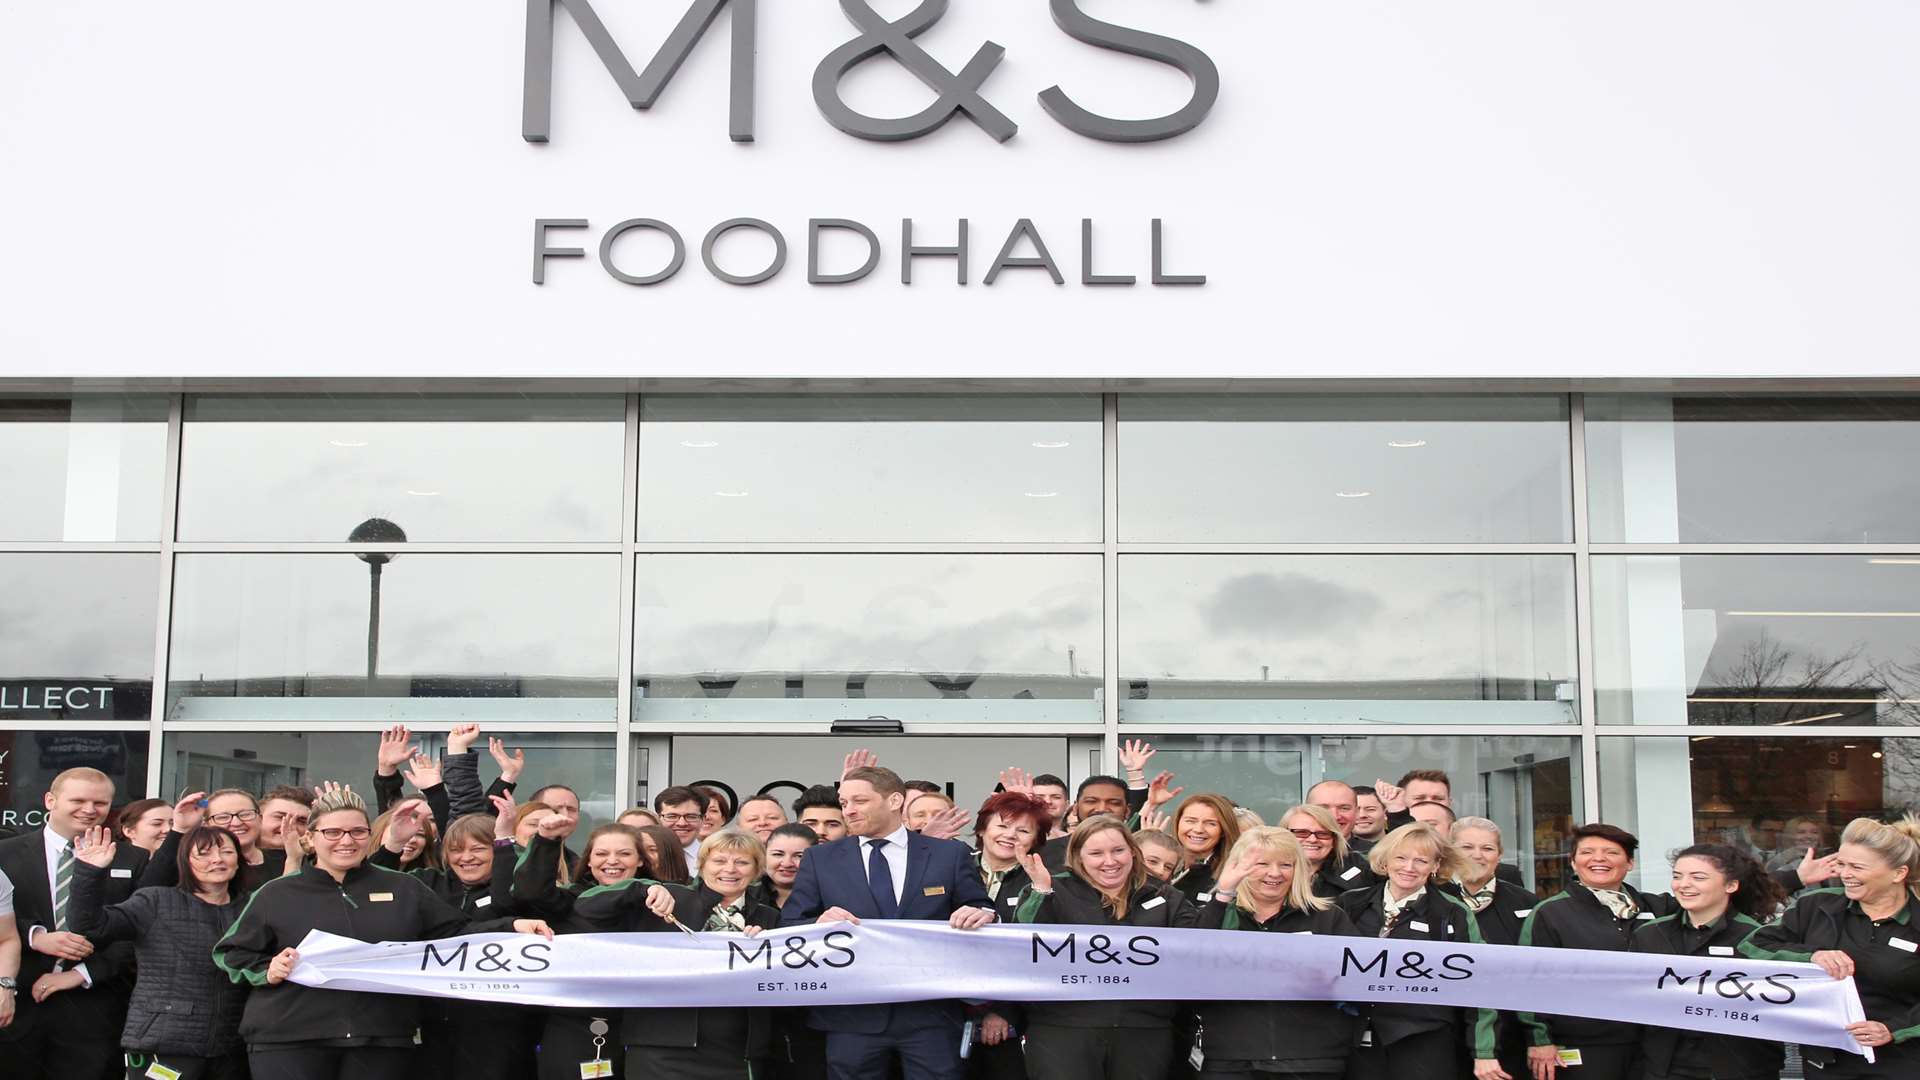 Now open- M&S Foodhall